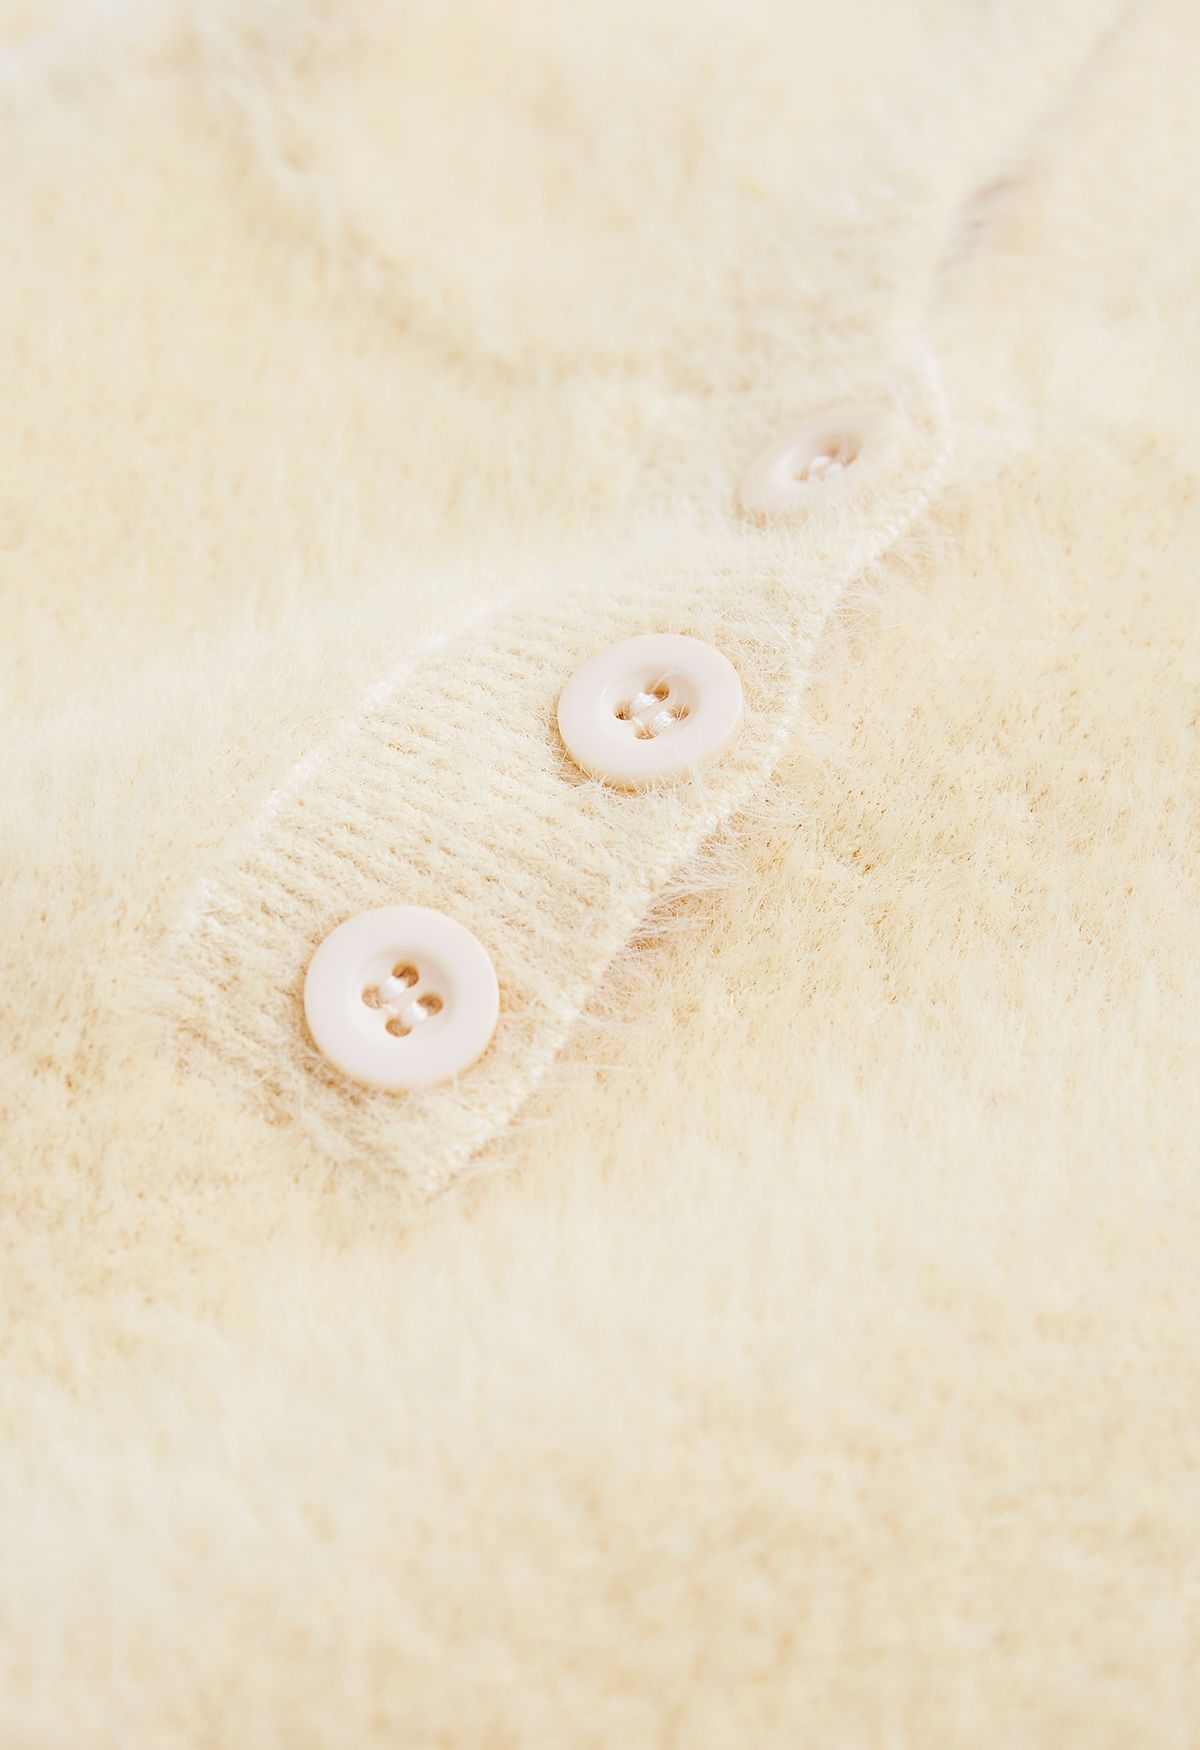 Lovely Bunny Fuzzy Knit Hooded Sweater in Cream For Kids